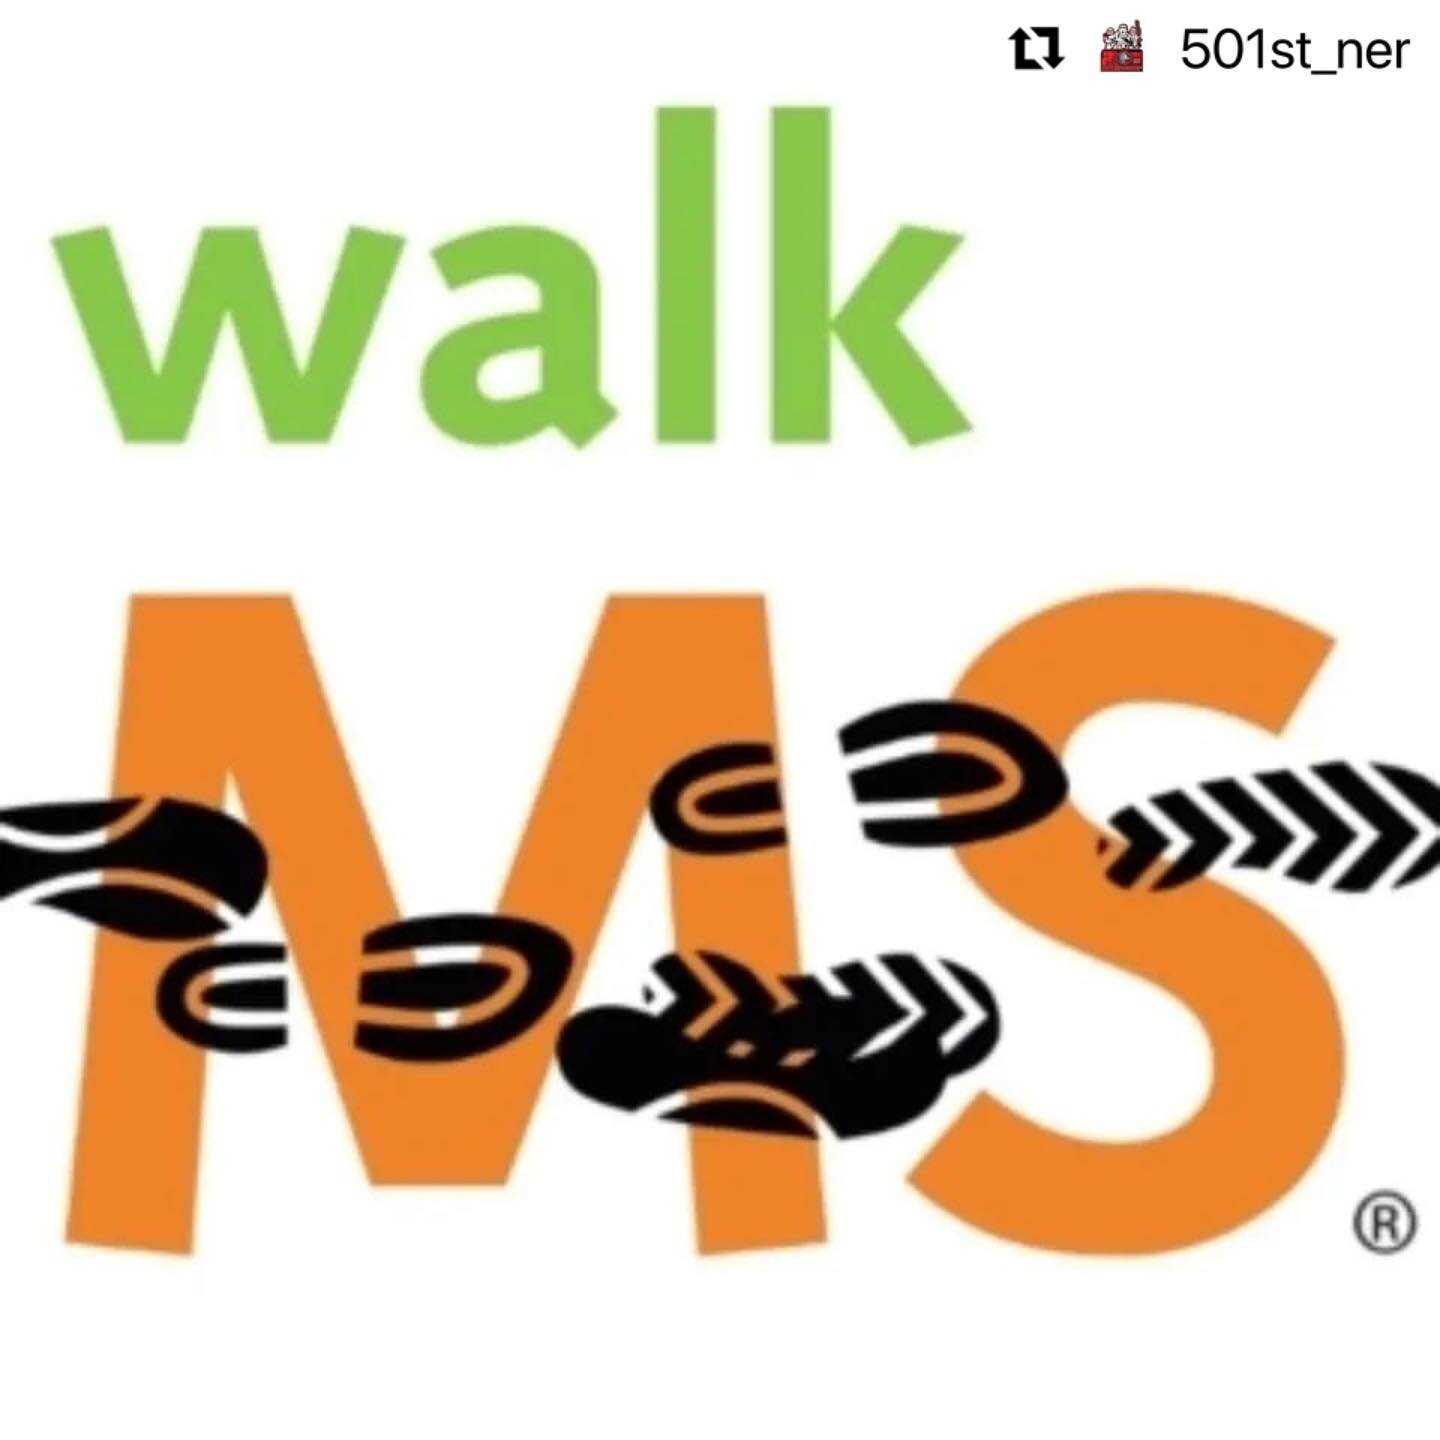 On April 29th, members of the @501st_ner and Devaron Base will be participating in #WalkMS in Seaside Park, NJ. We will be walking in costume for both the challenge and to bring attention to the cause. Please share, if you see fit, and if you would l